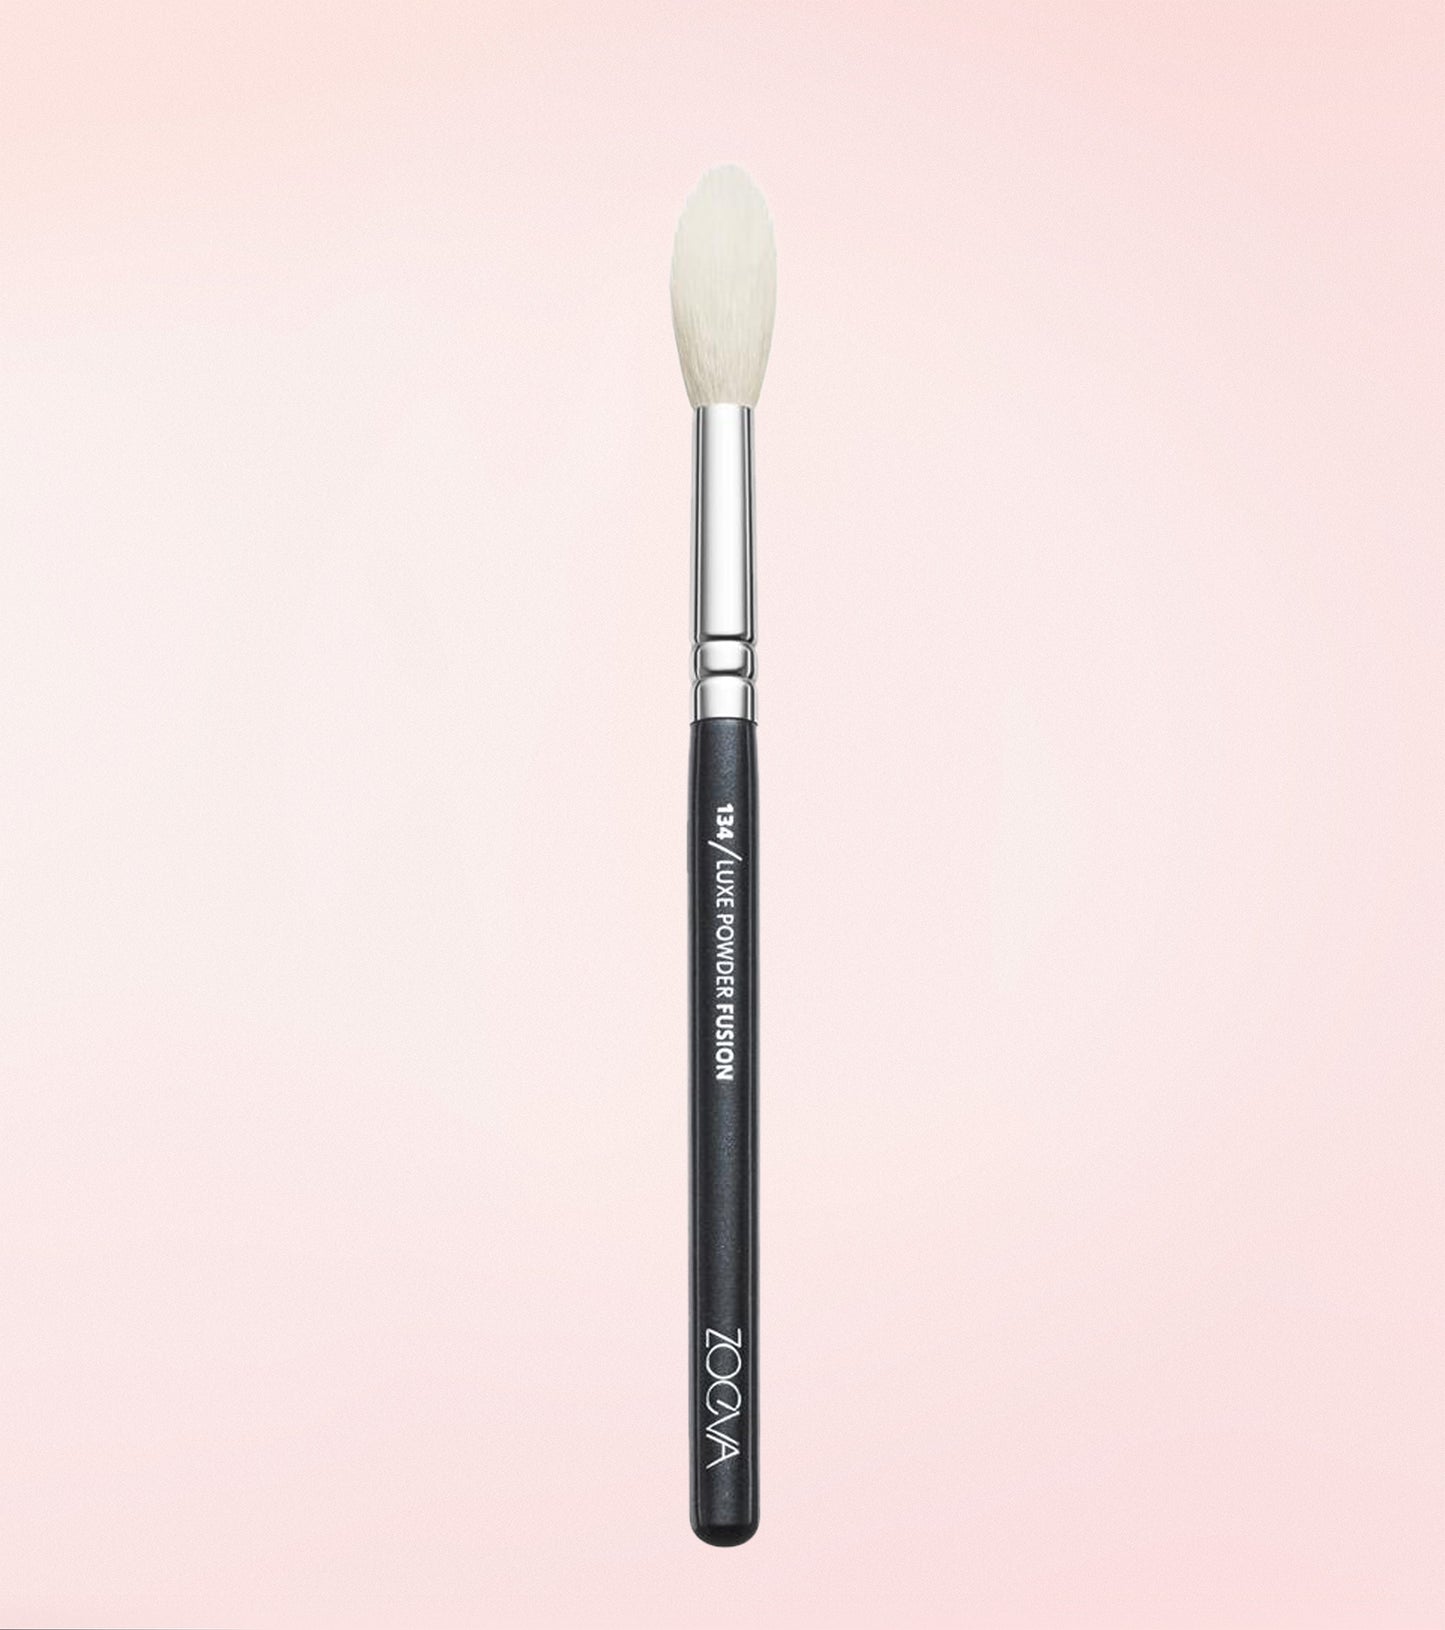 134 Luxe Powder Fusion Brush Expanded Image 1